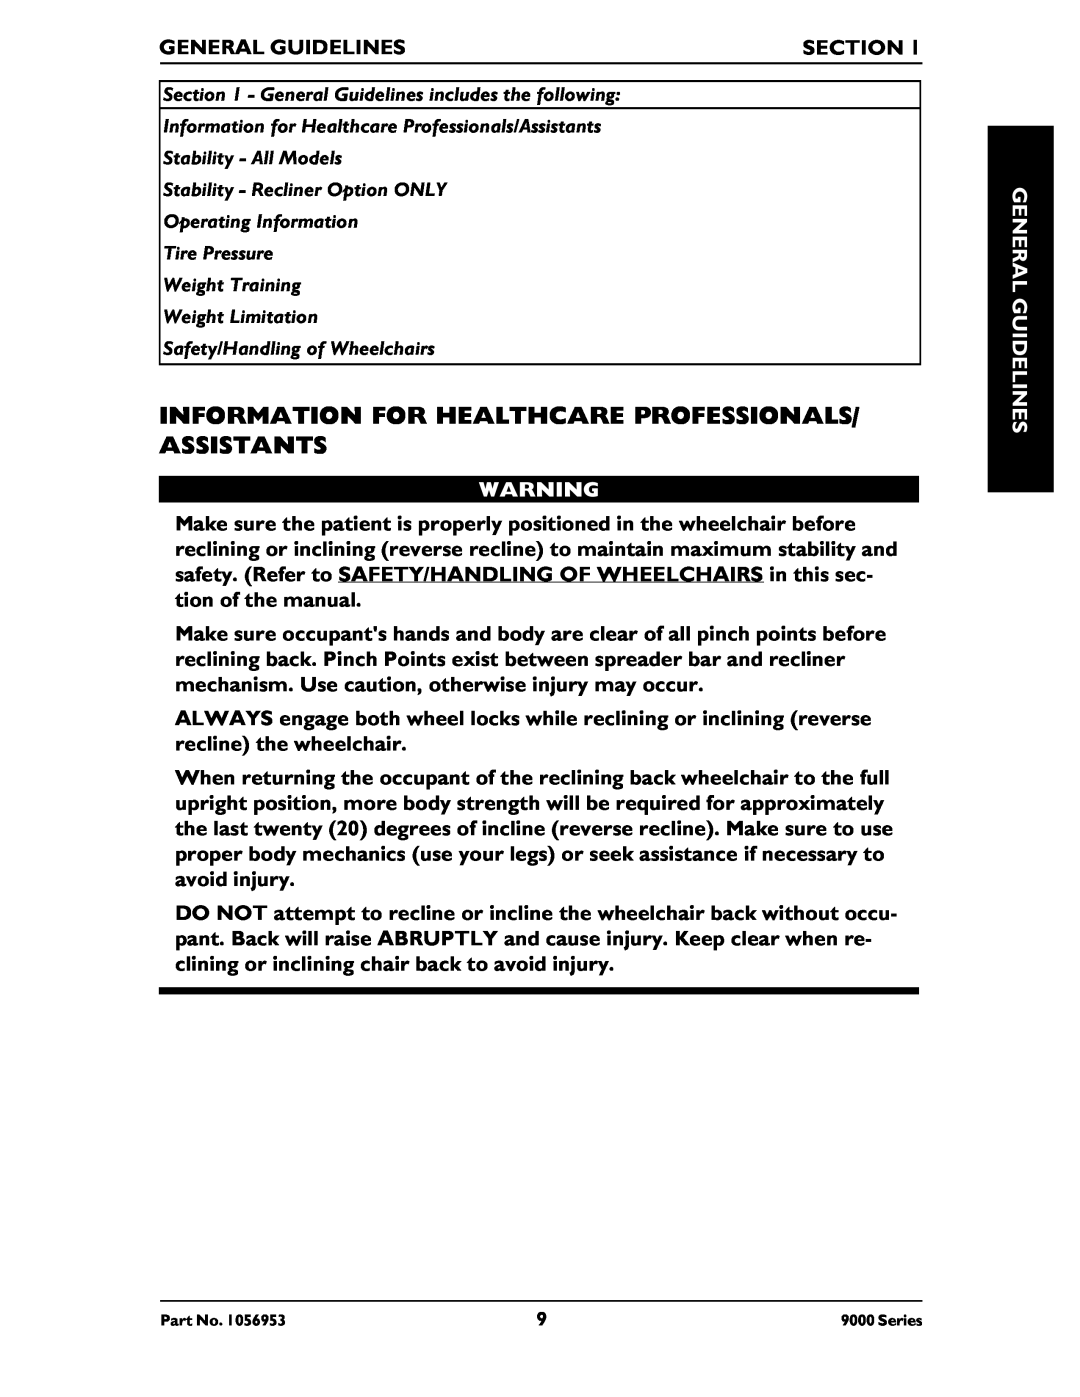 Invacare 9000 SL, 9000 XT, 9000 Series Information For Healthcare Professionals/ Assistants, General Guidelines, Section 